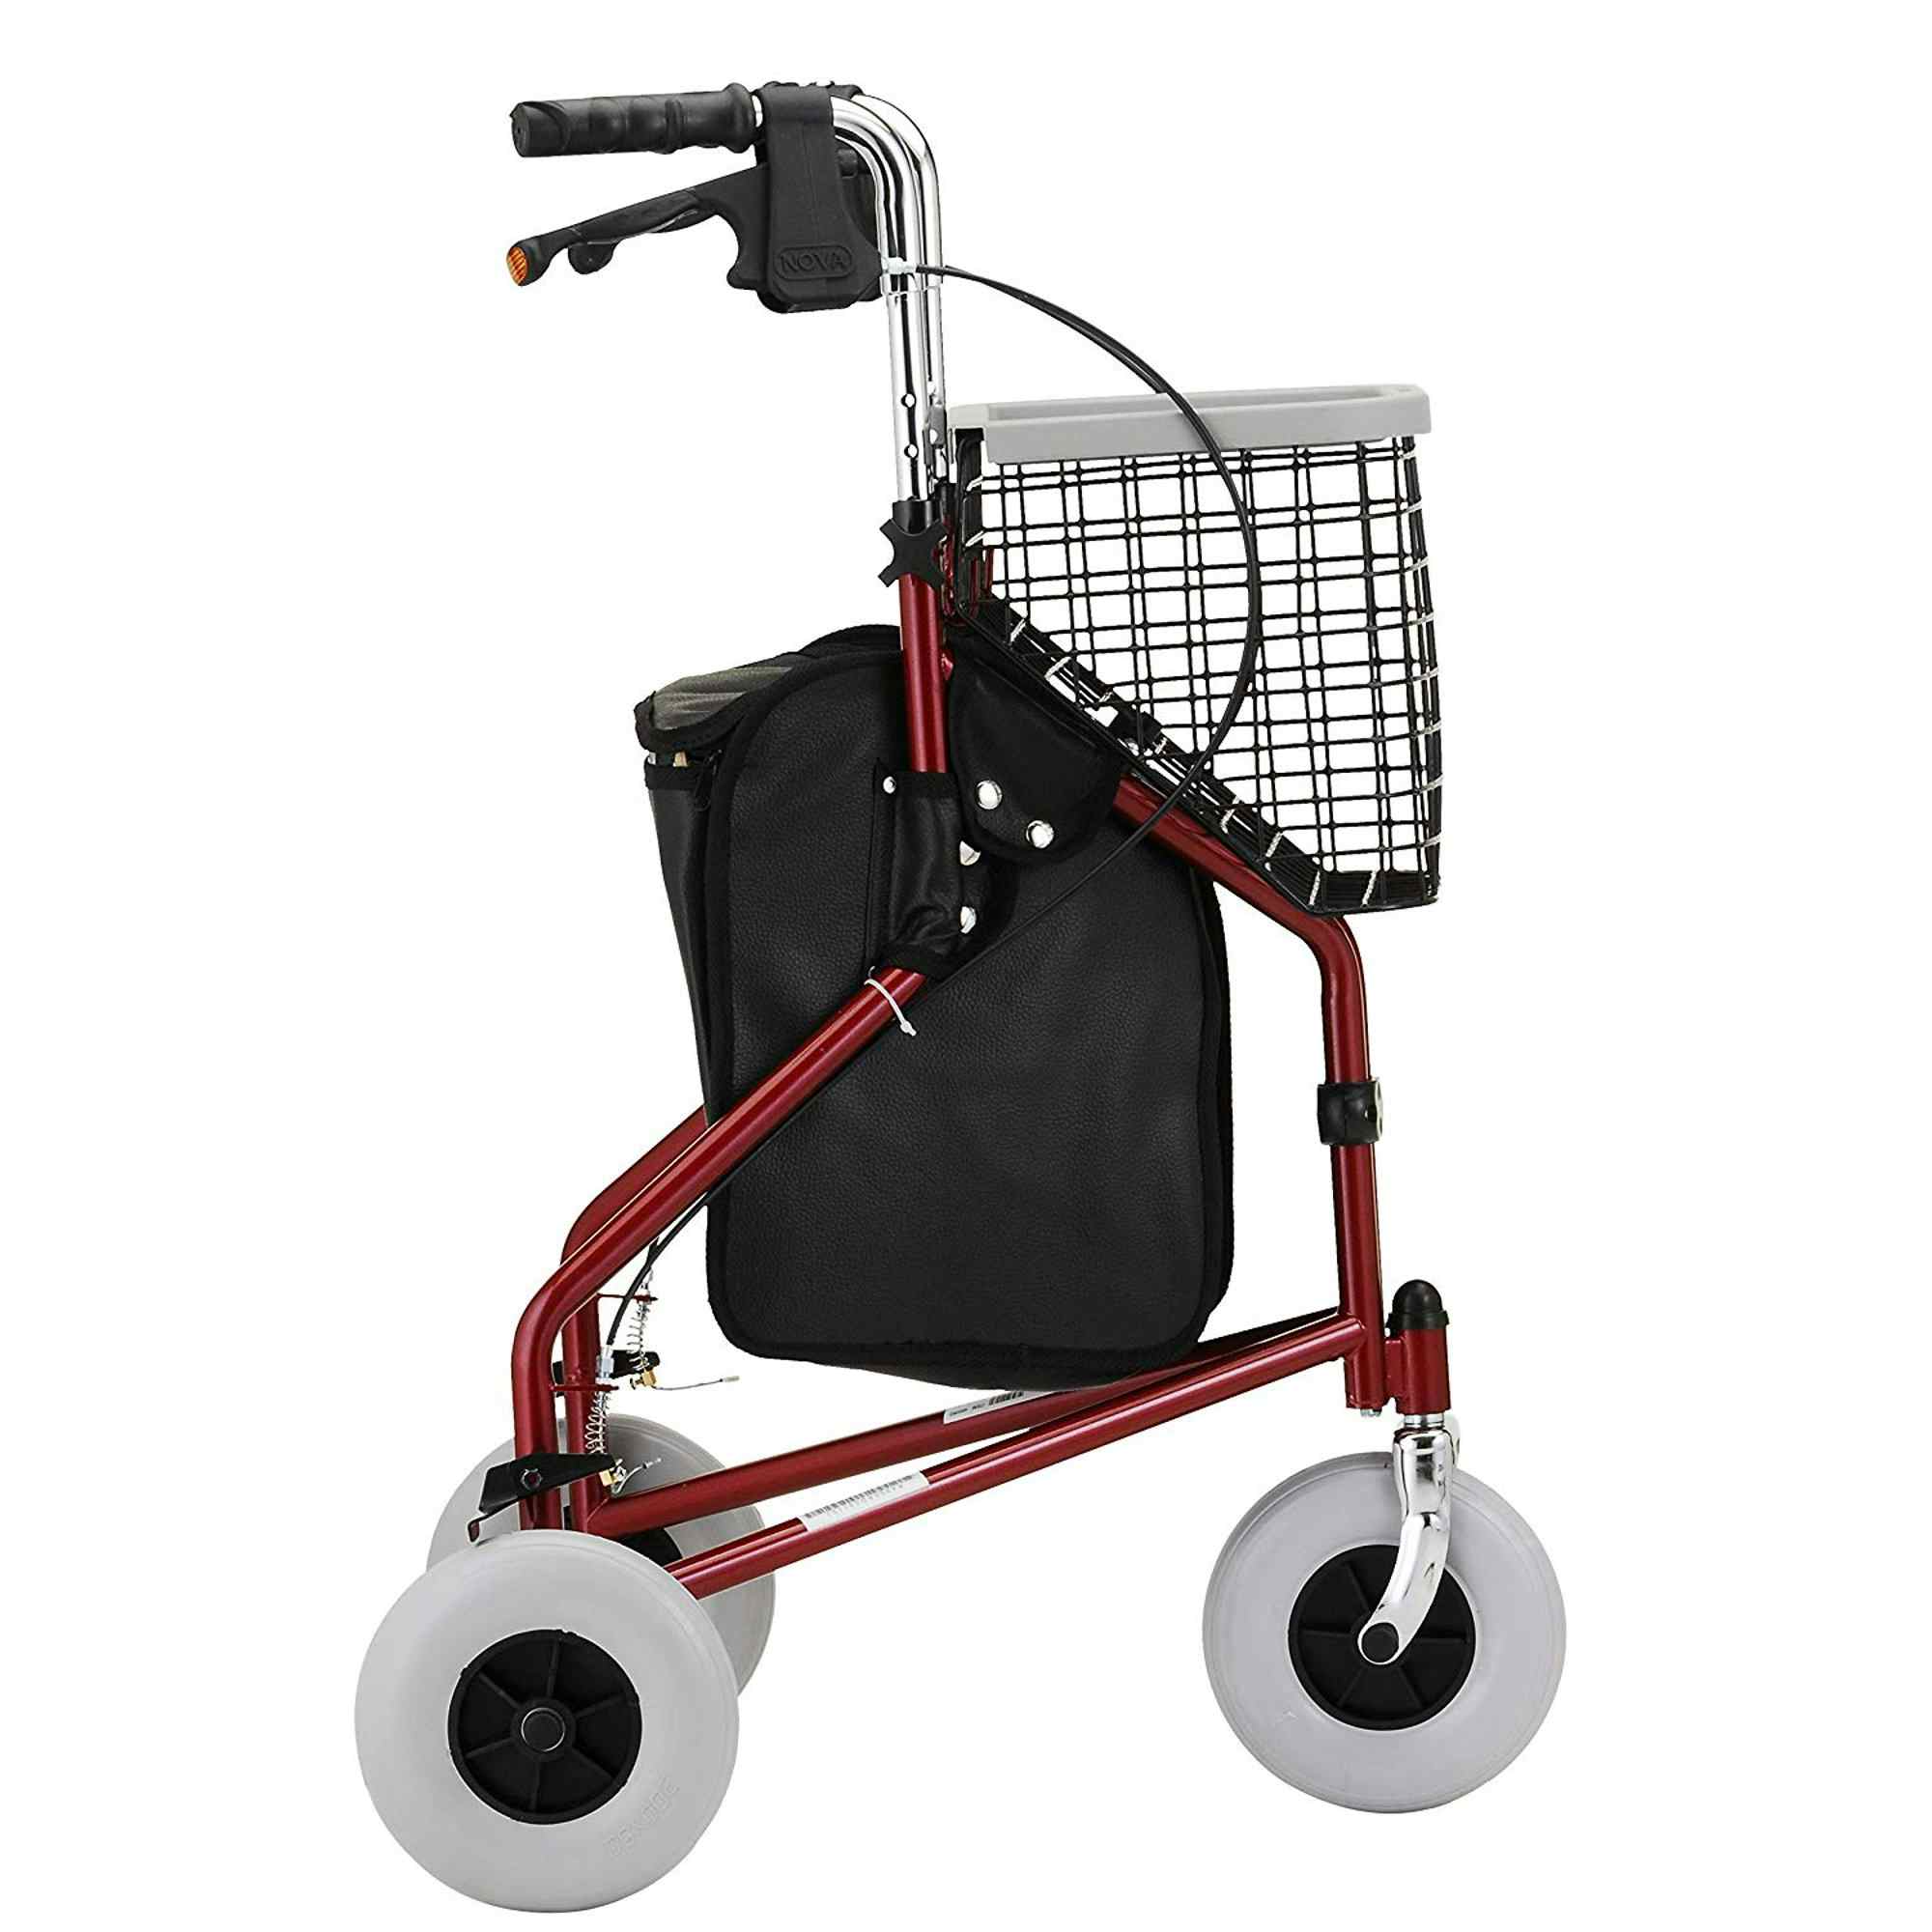 Traveler Adjustable Height 7 Wheel Rollator, 8" Casters, 4900RD, Red - 1 Each